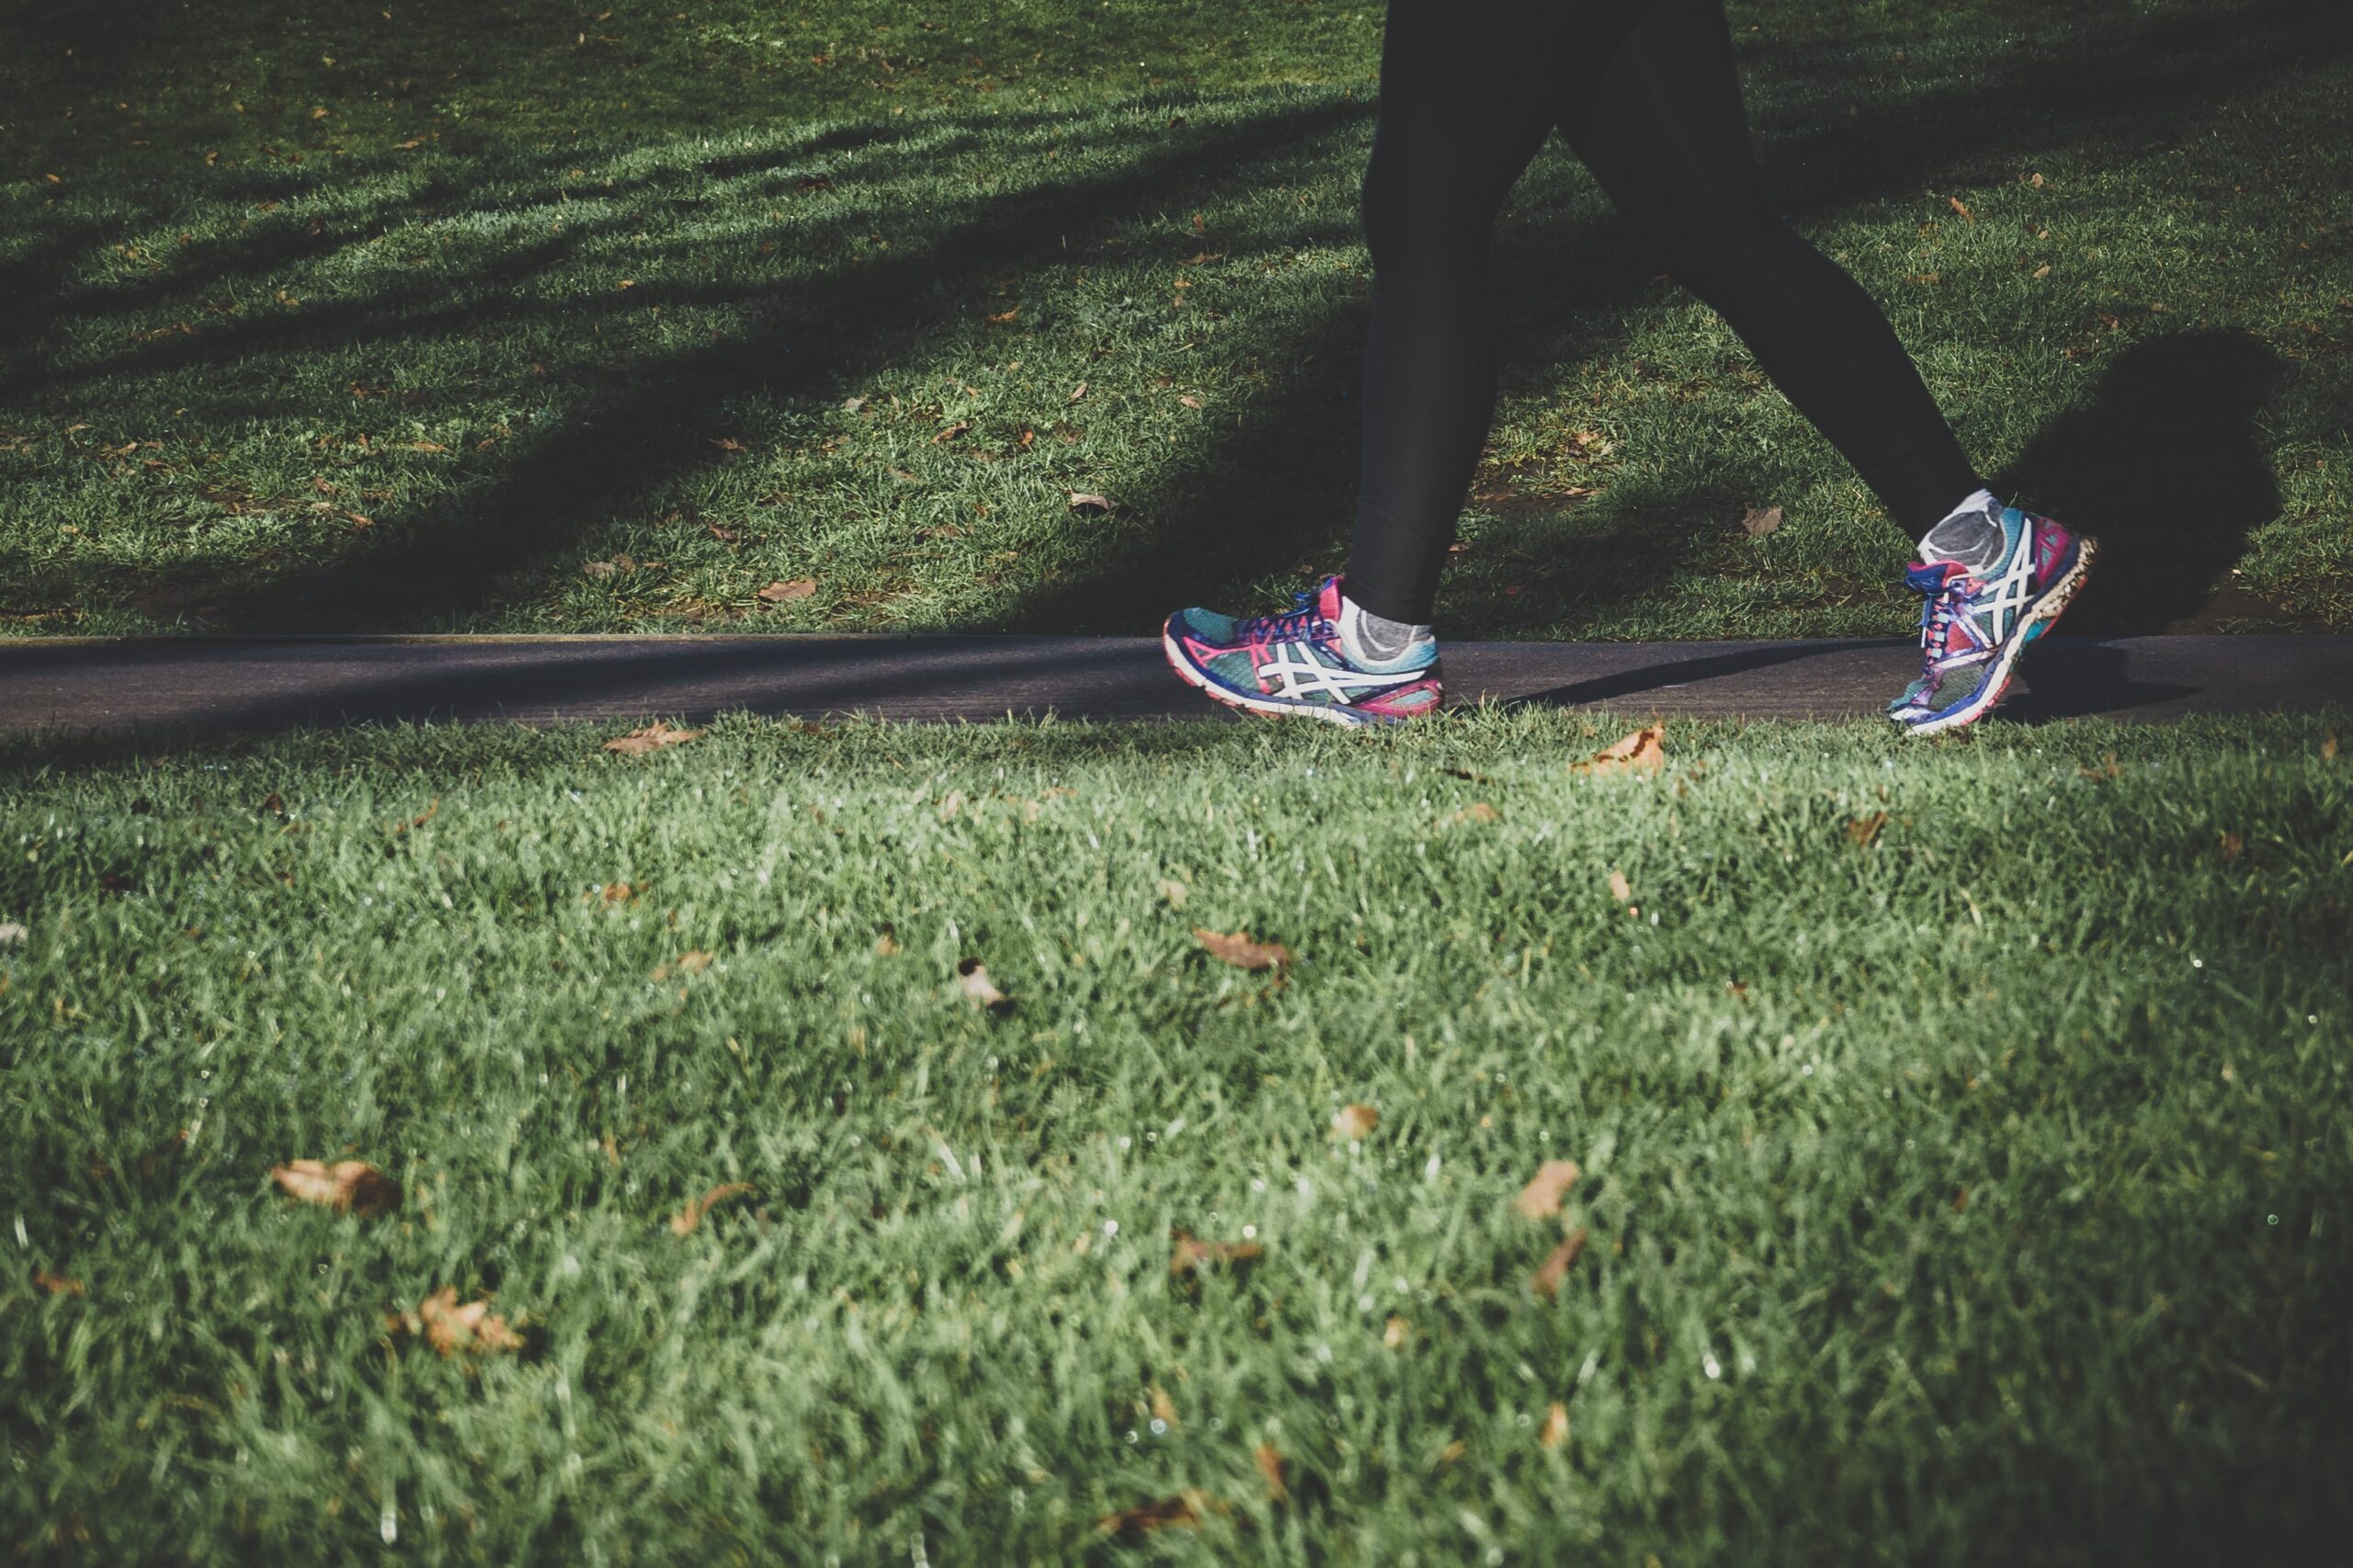 A persons legs from the hips down wearing leggins and sneakers walks on a paved path between patches of grass dotted with leaves.